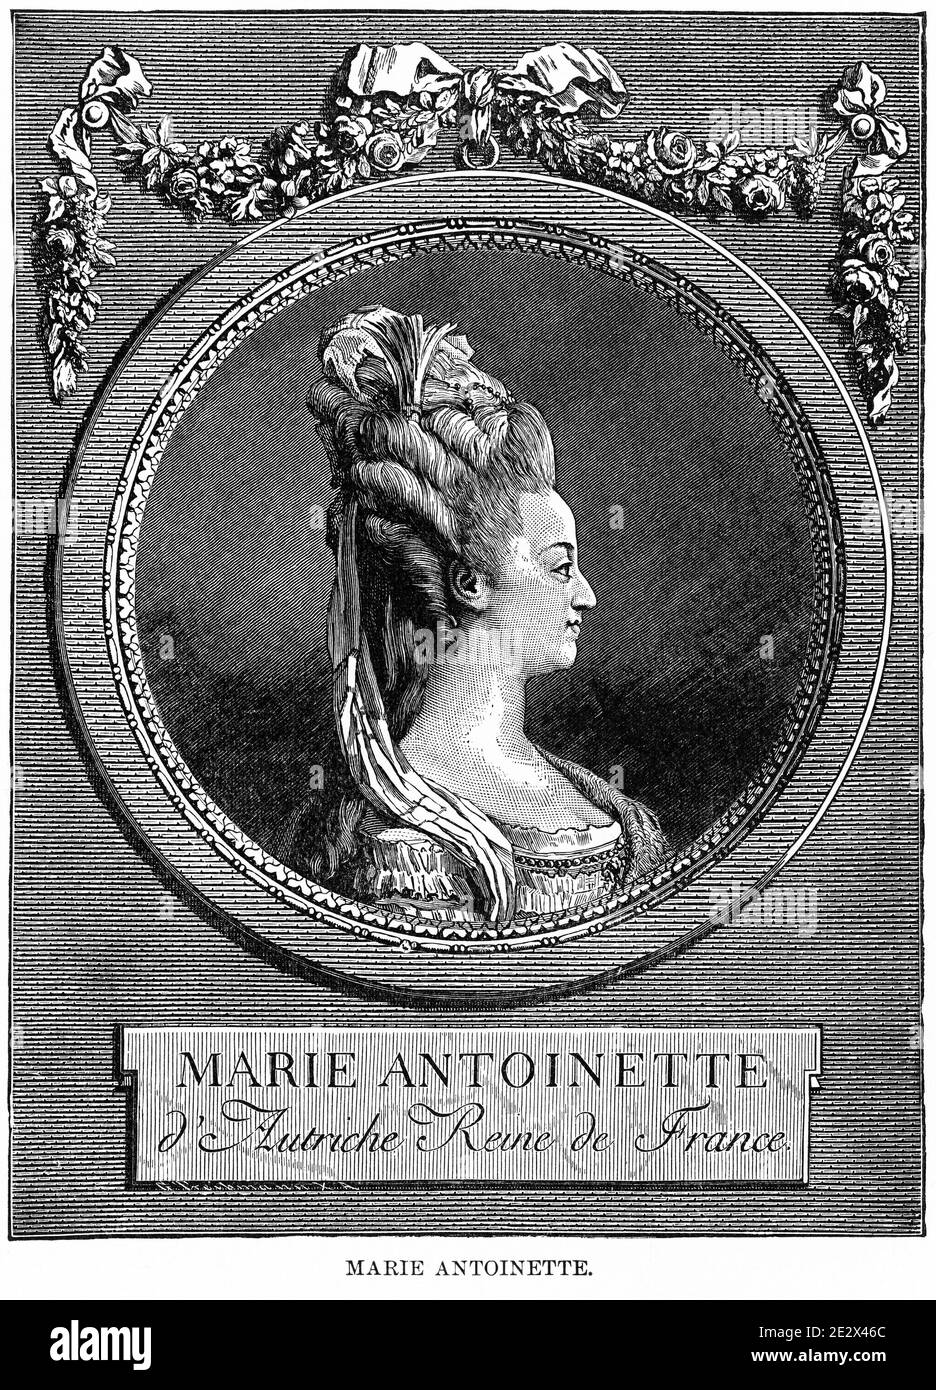 Marie Antoinette, The Women on the Road to Versailles, drawn by Vierge, Illustration, Ridpath's History of the World, Volume III, by John Clark Ridpath, LL. D., Merrill & Baker Publishers, New York, 1897 Stock Photo